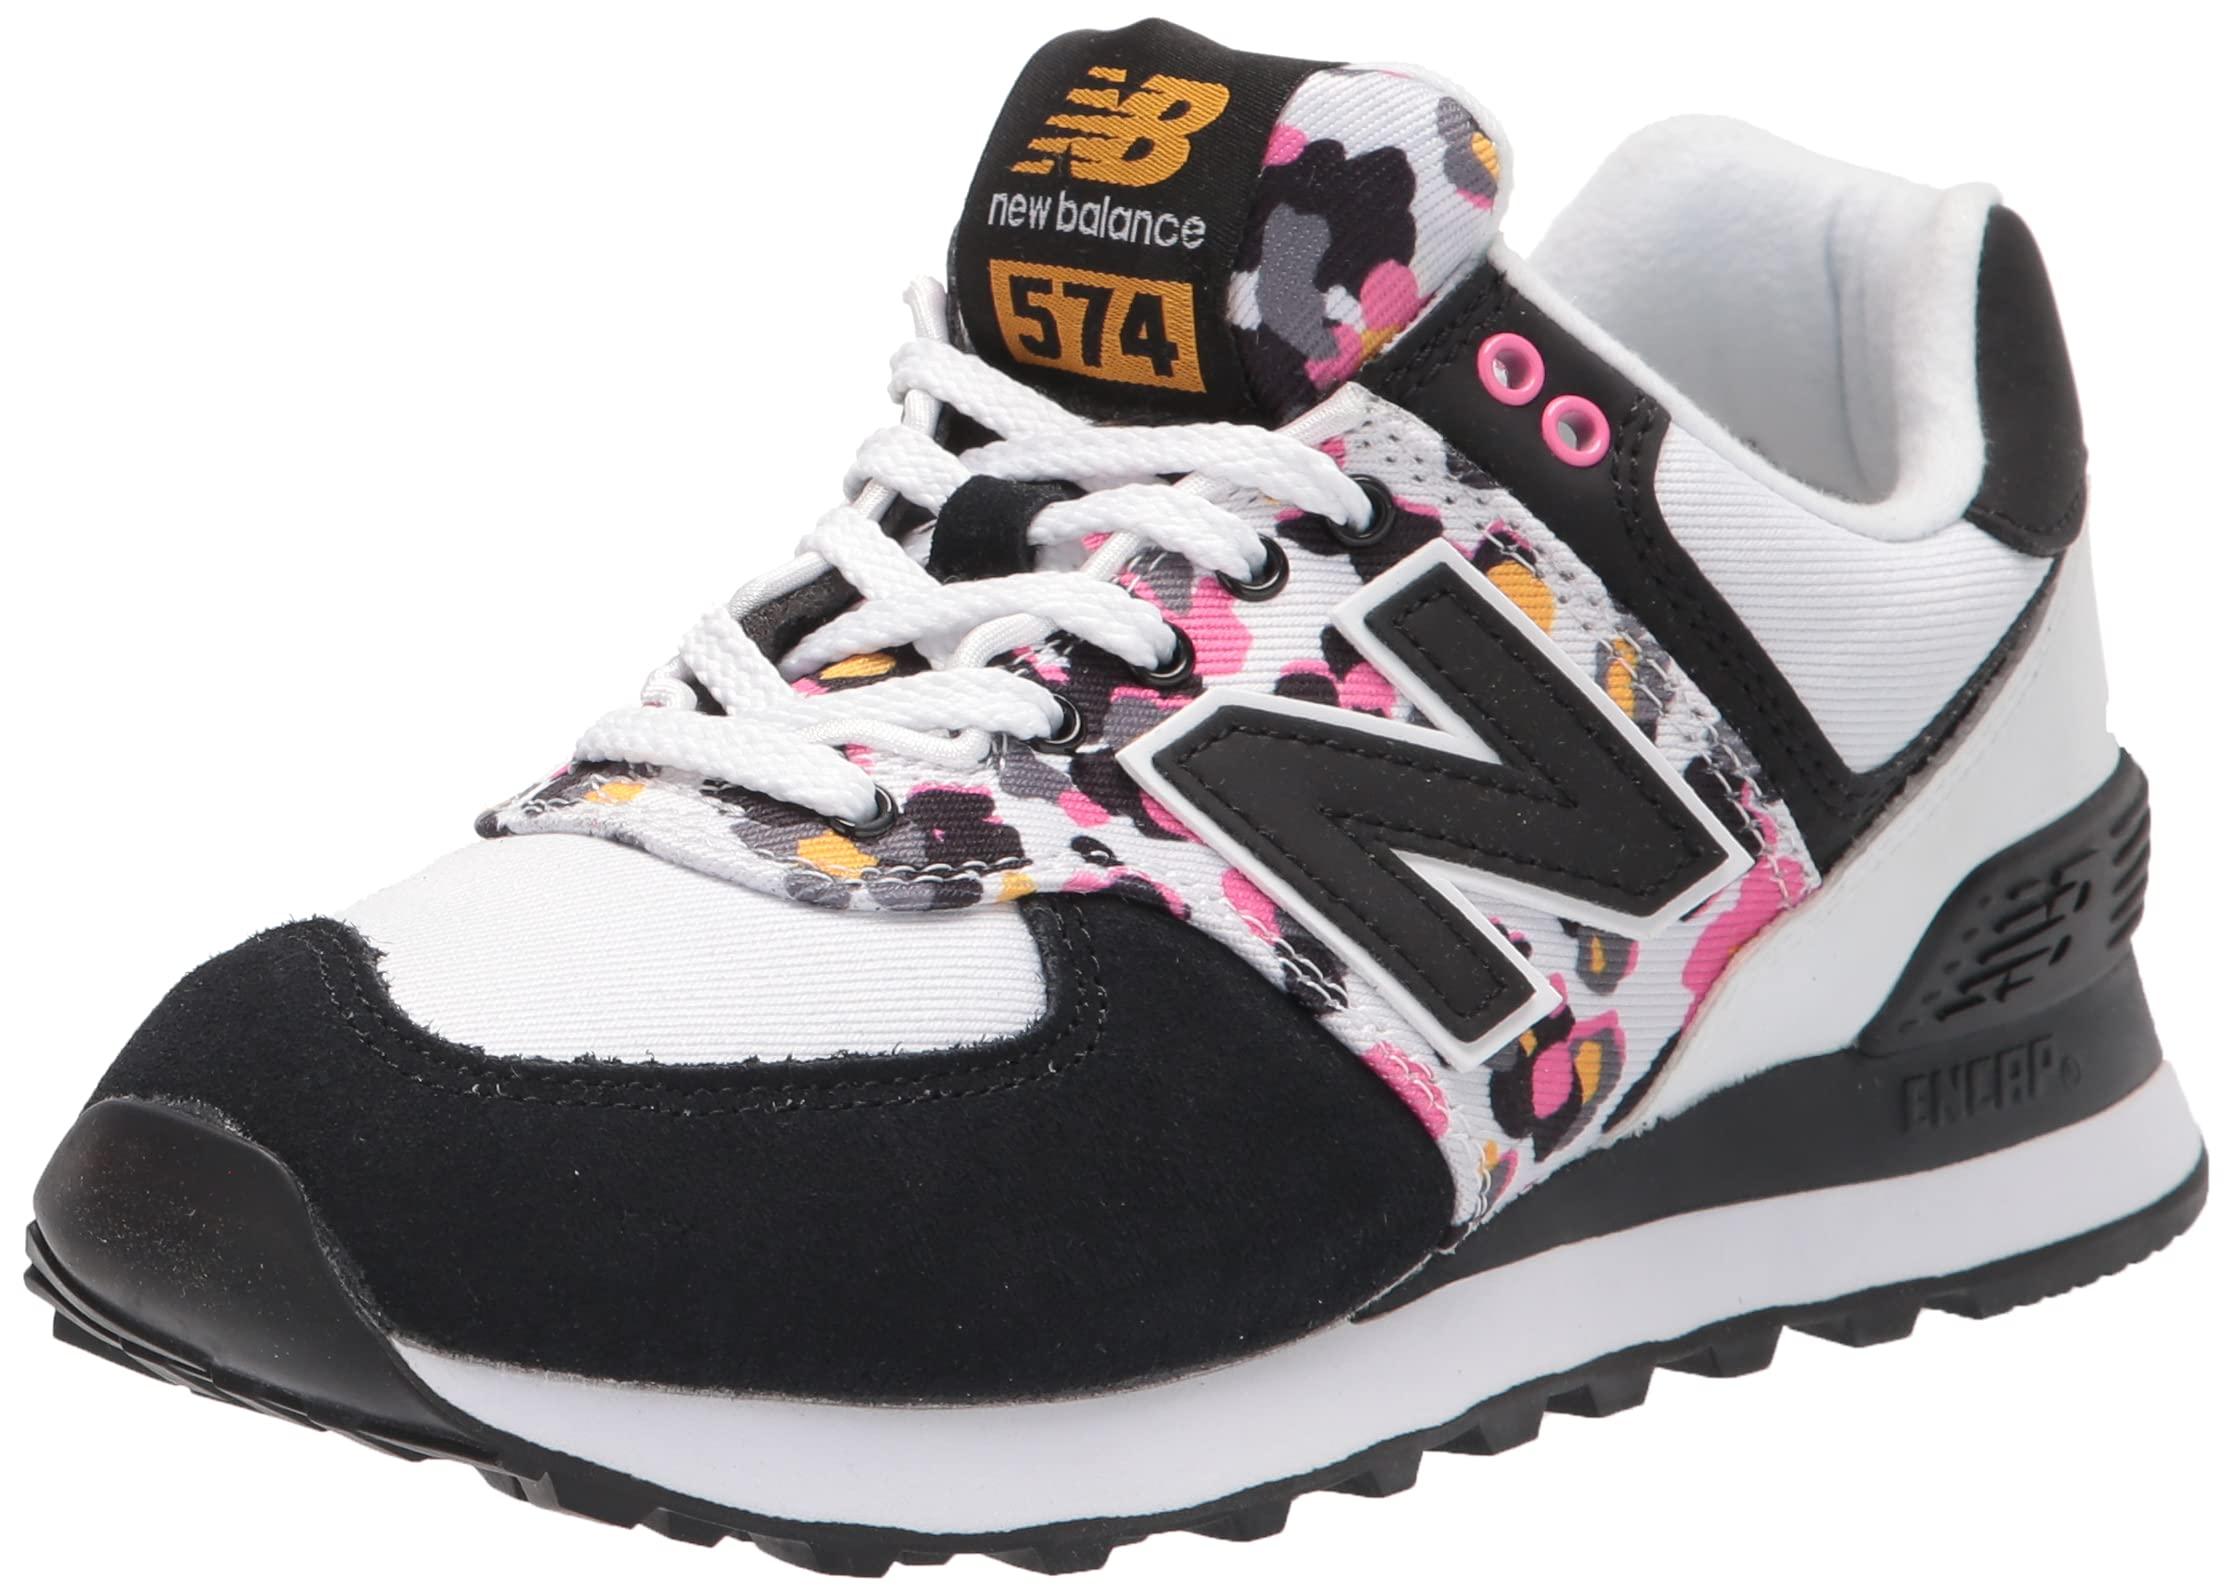 New Balance 574 V2 Floral Camo Sneaker in Black | Lyst